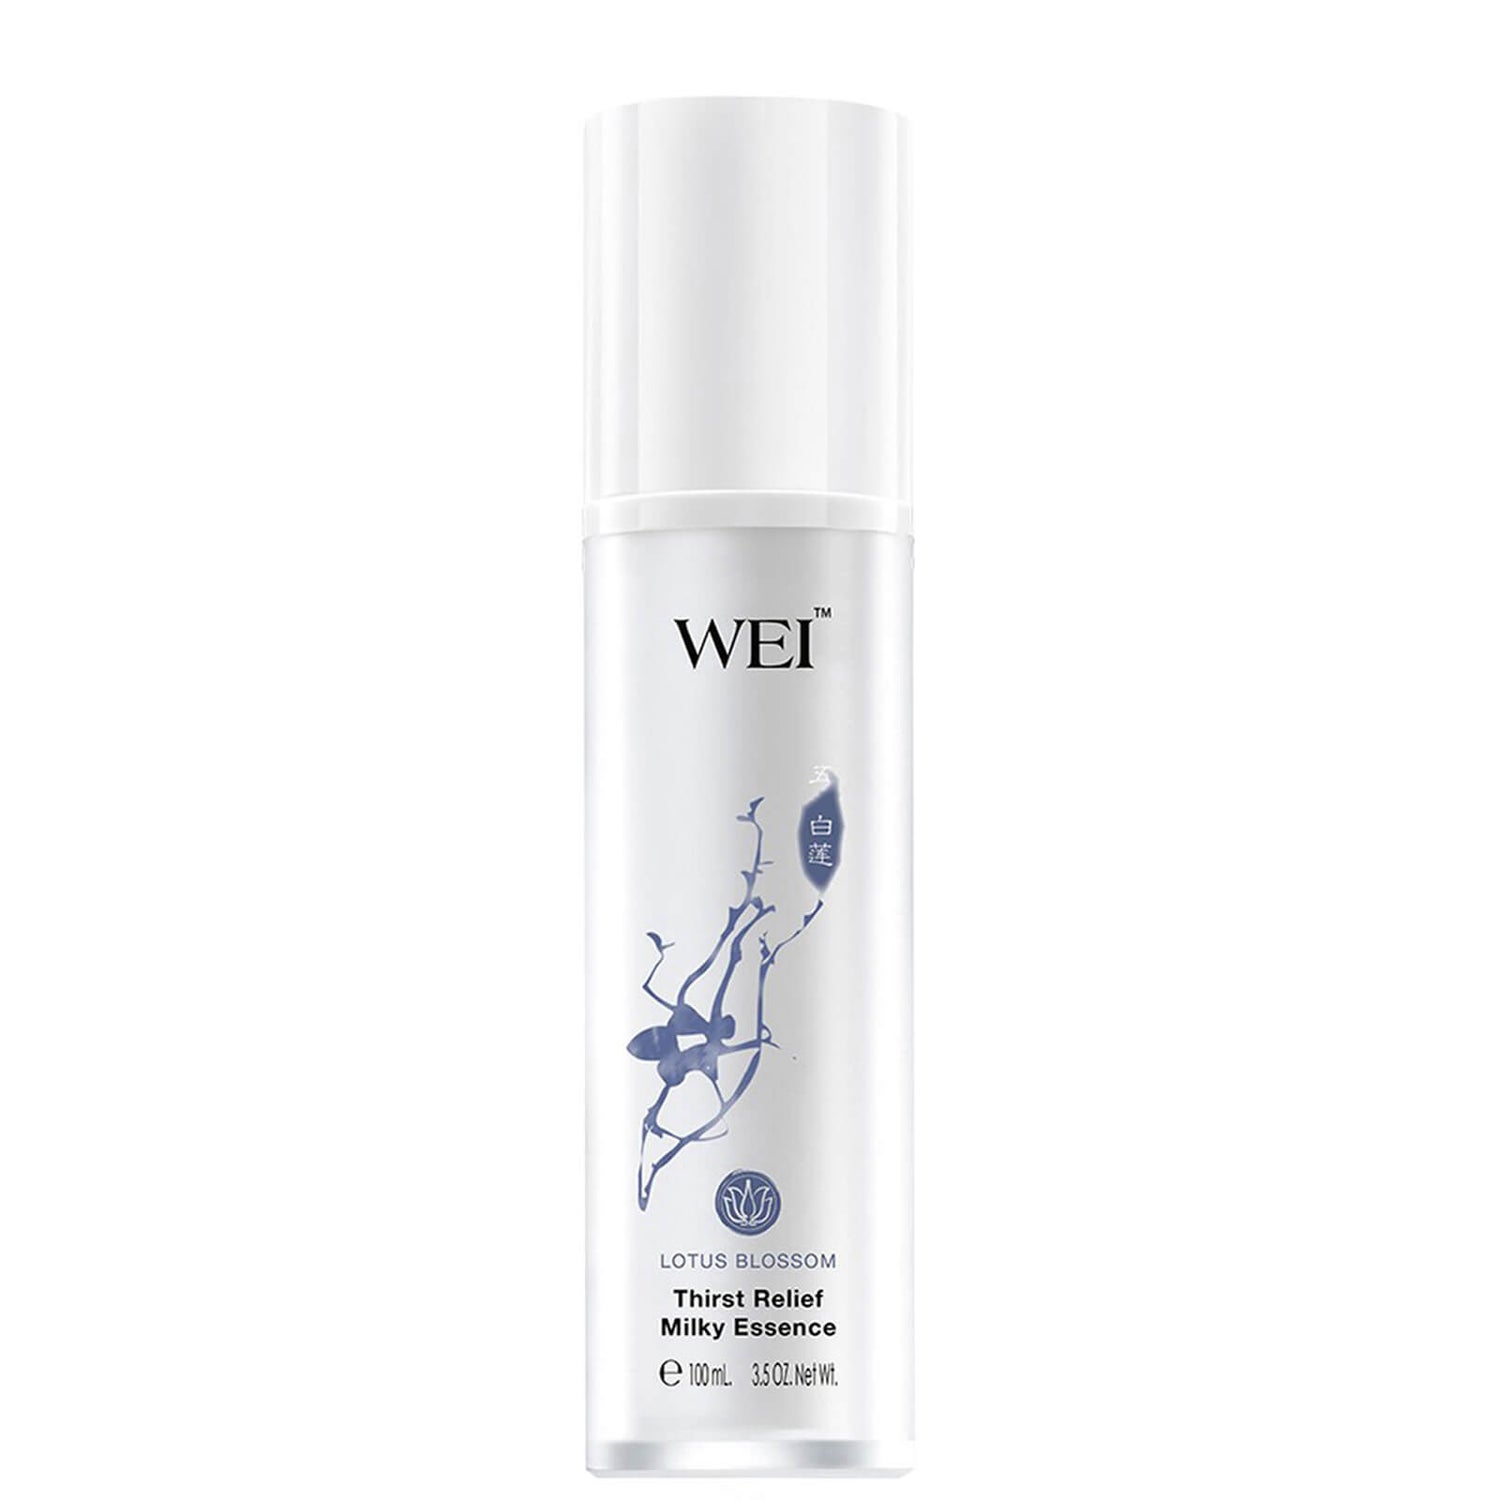 WEI Lotus Blossom Thirst Relief Milky Essence